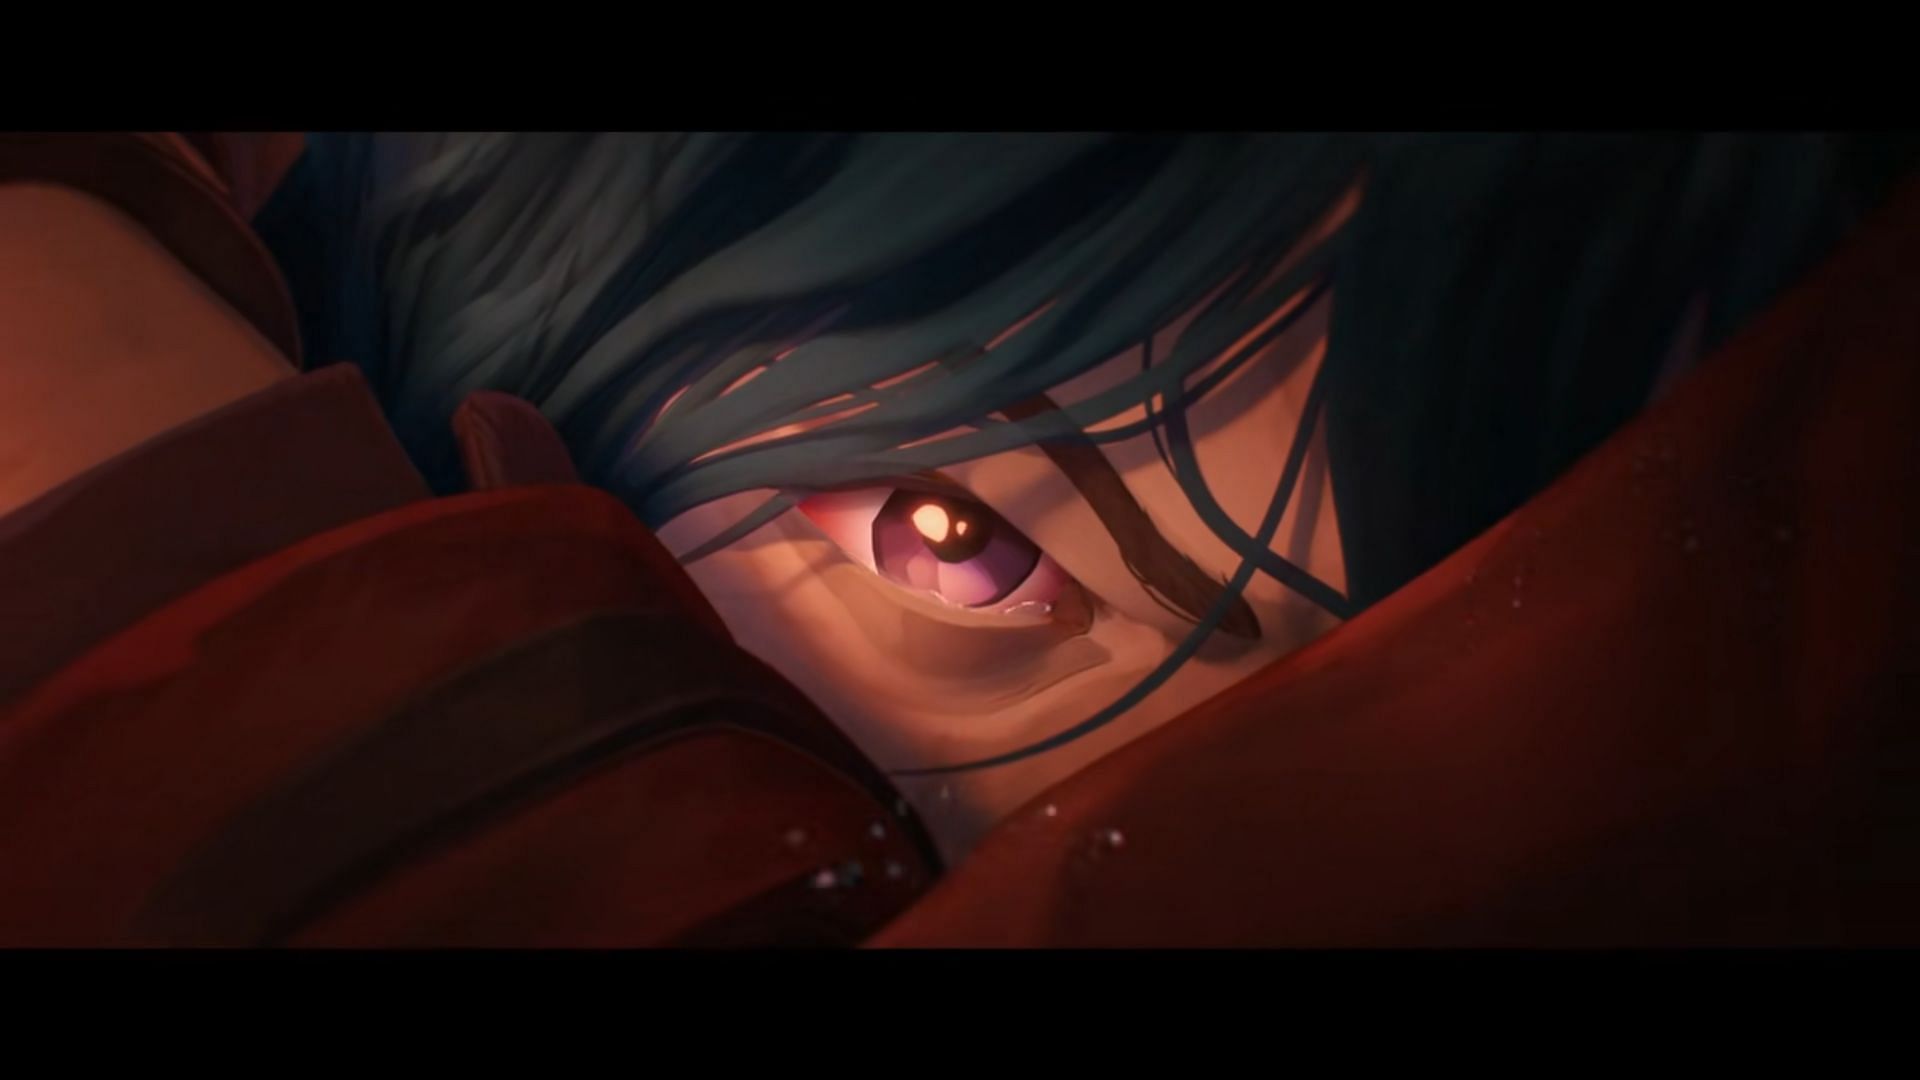 Powder is dead and Jinx is born in Episode 3 of Arcane (Image via League of Legends)